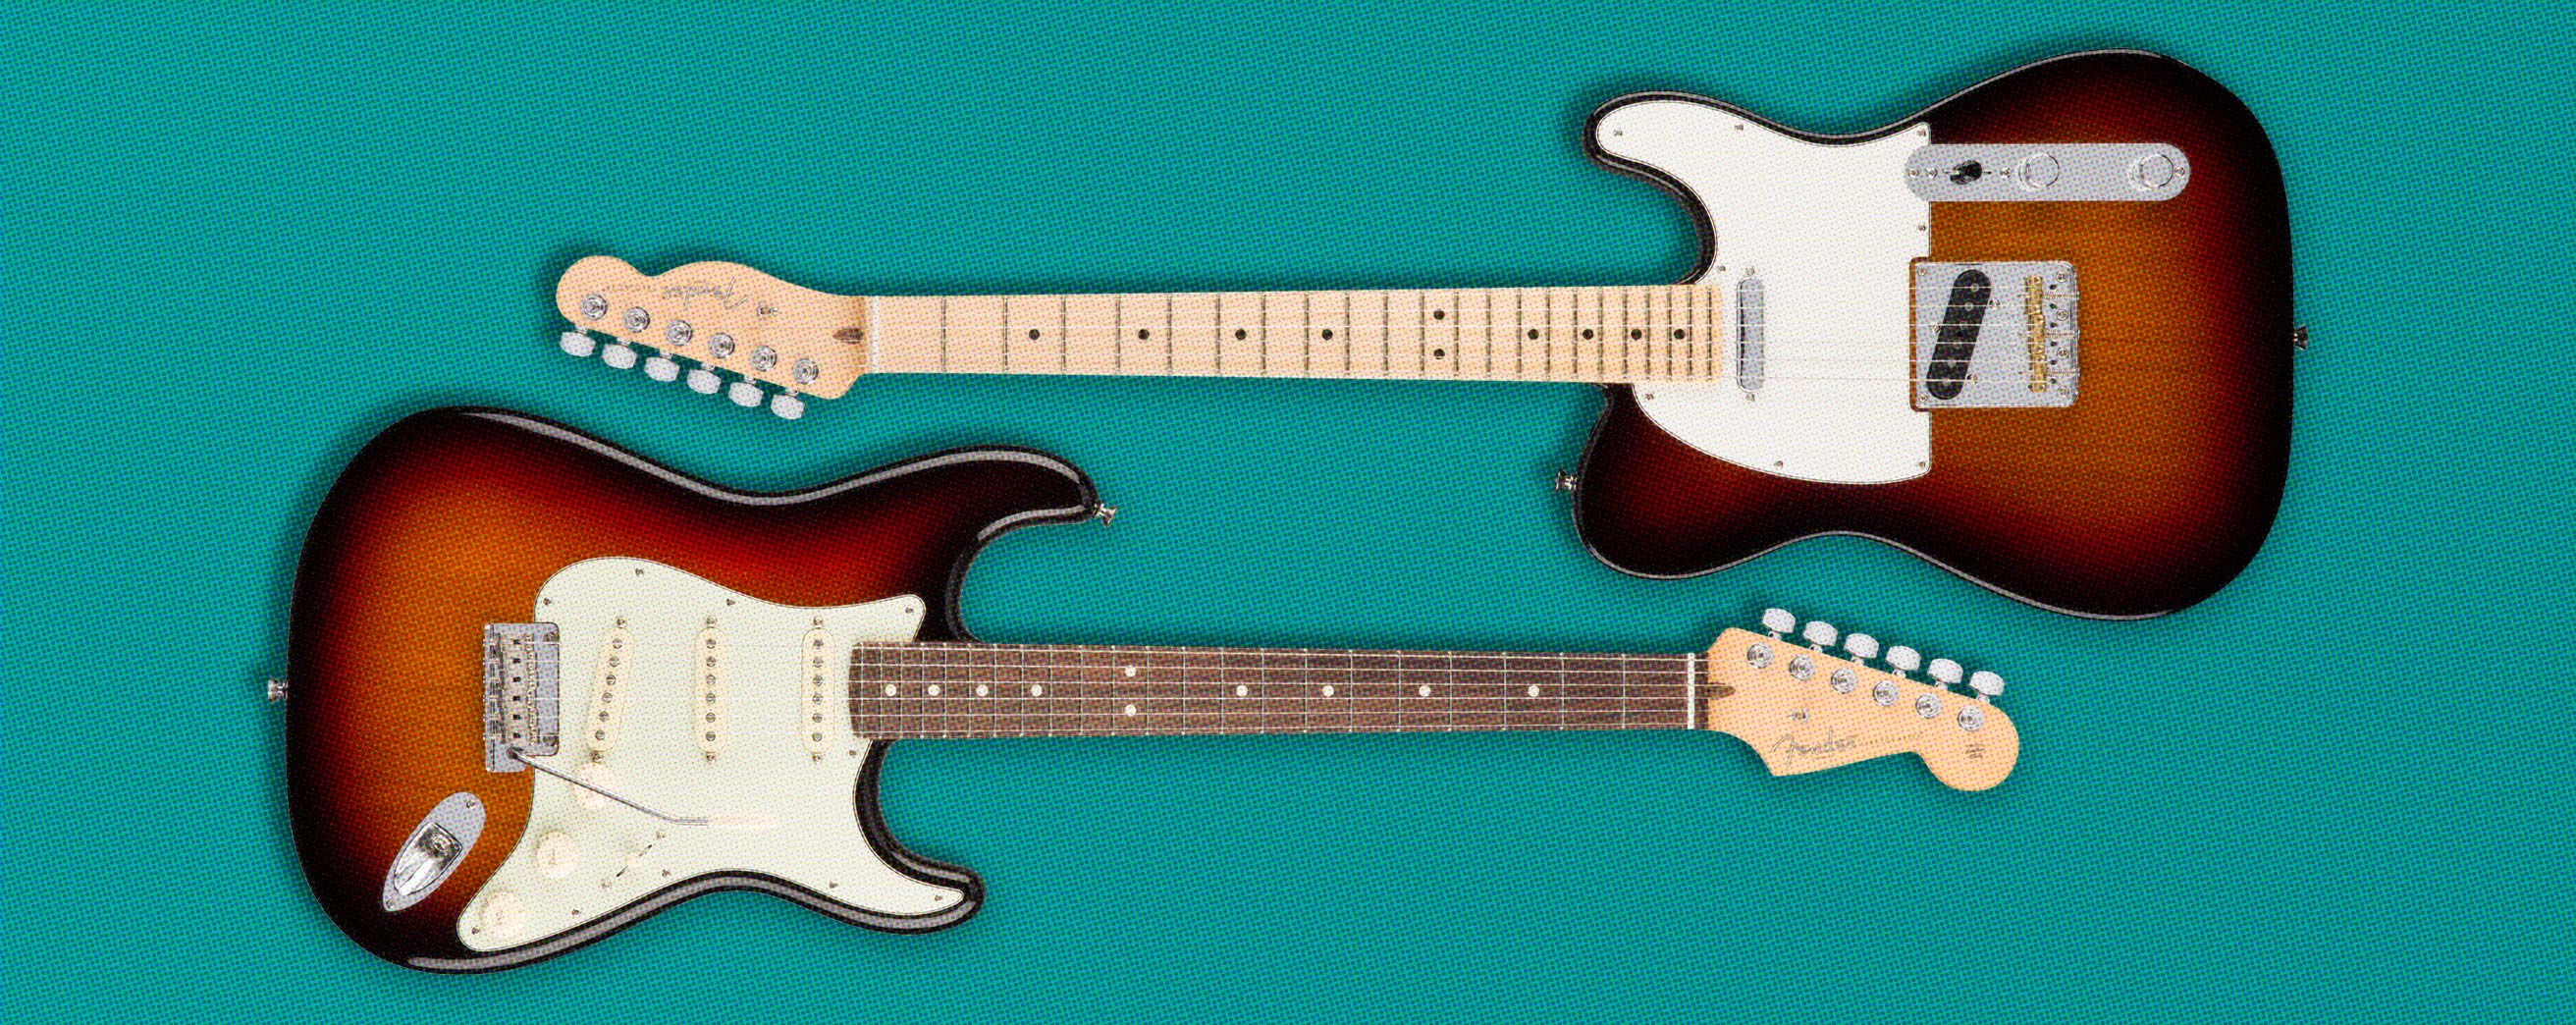 Innovations in Electric Guitar Design: The Stratocaster and Telecaster Revolution